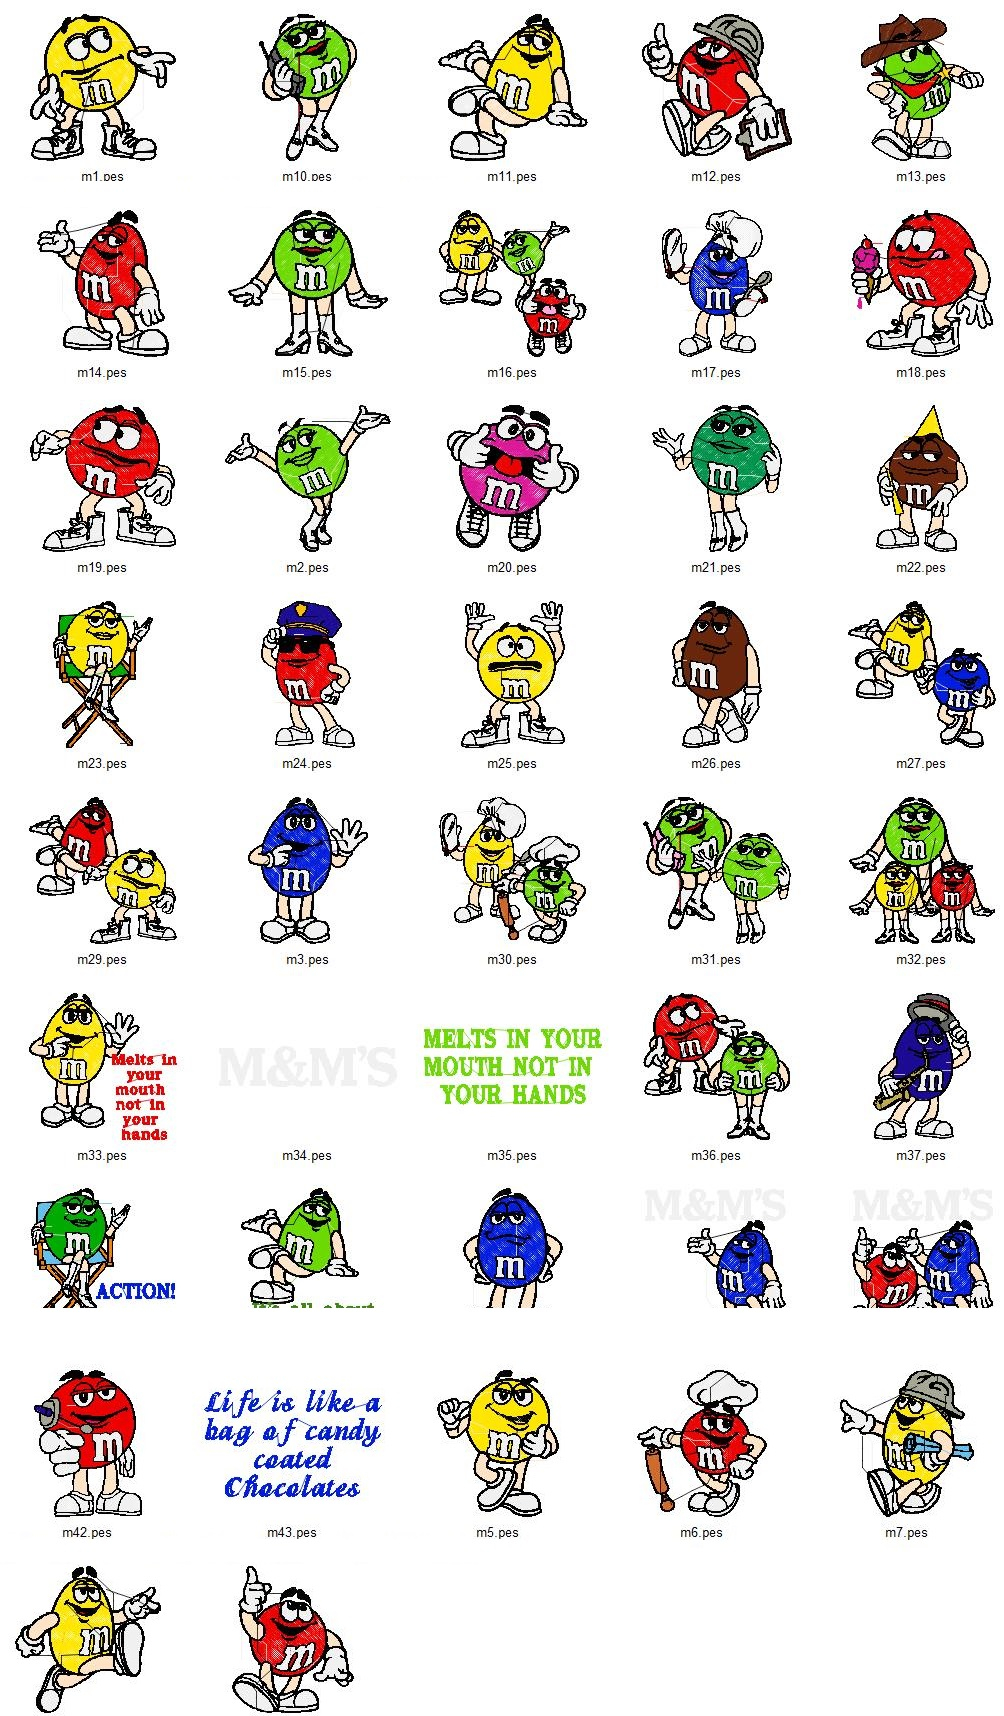 Disney Embroidery Patterns Mnm Mm Cartoon Characters Embroidery Designs